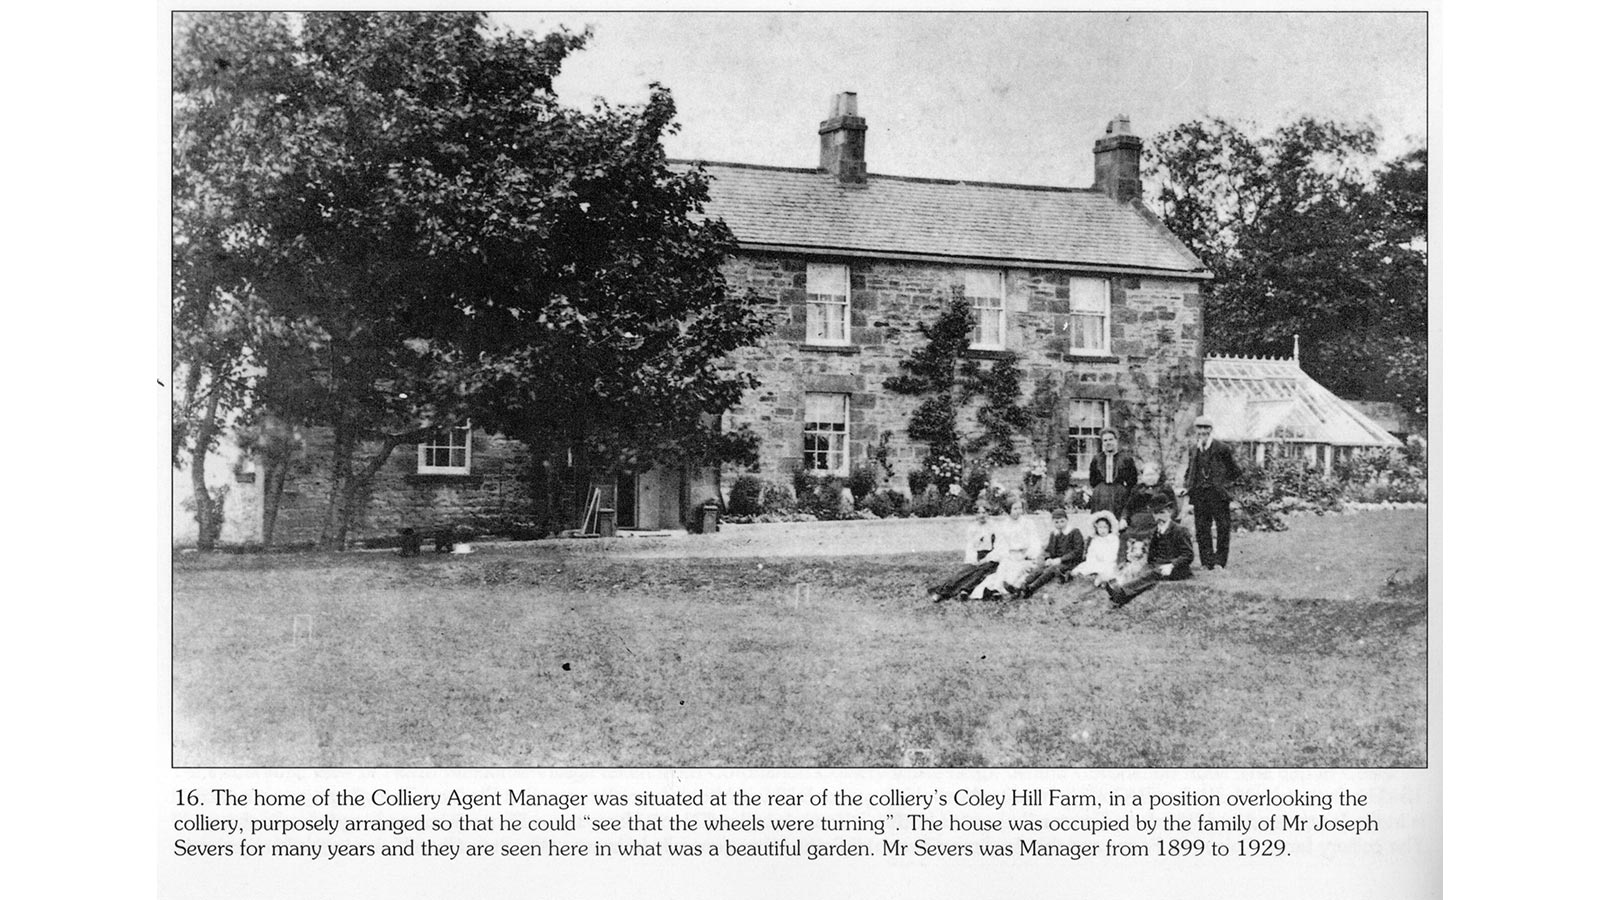 image of Colliery Agent Manager Mr Joseph Severs' home - 1920